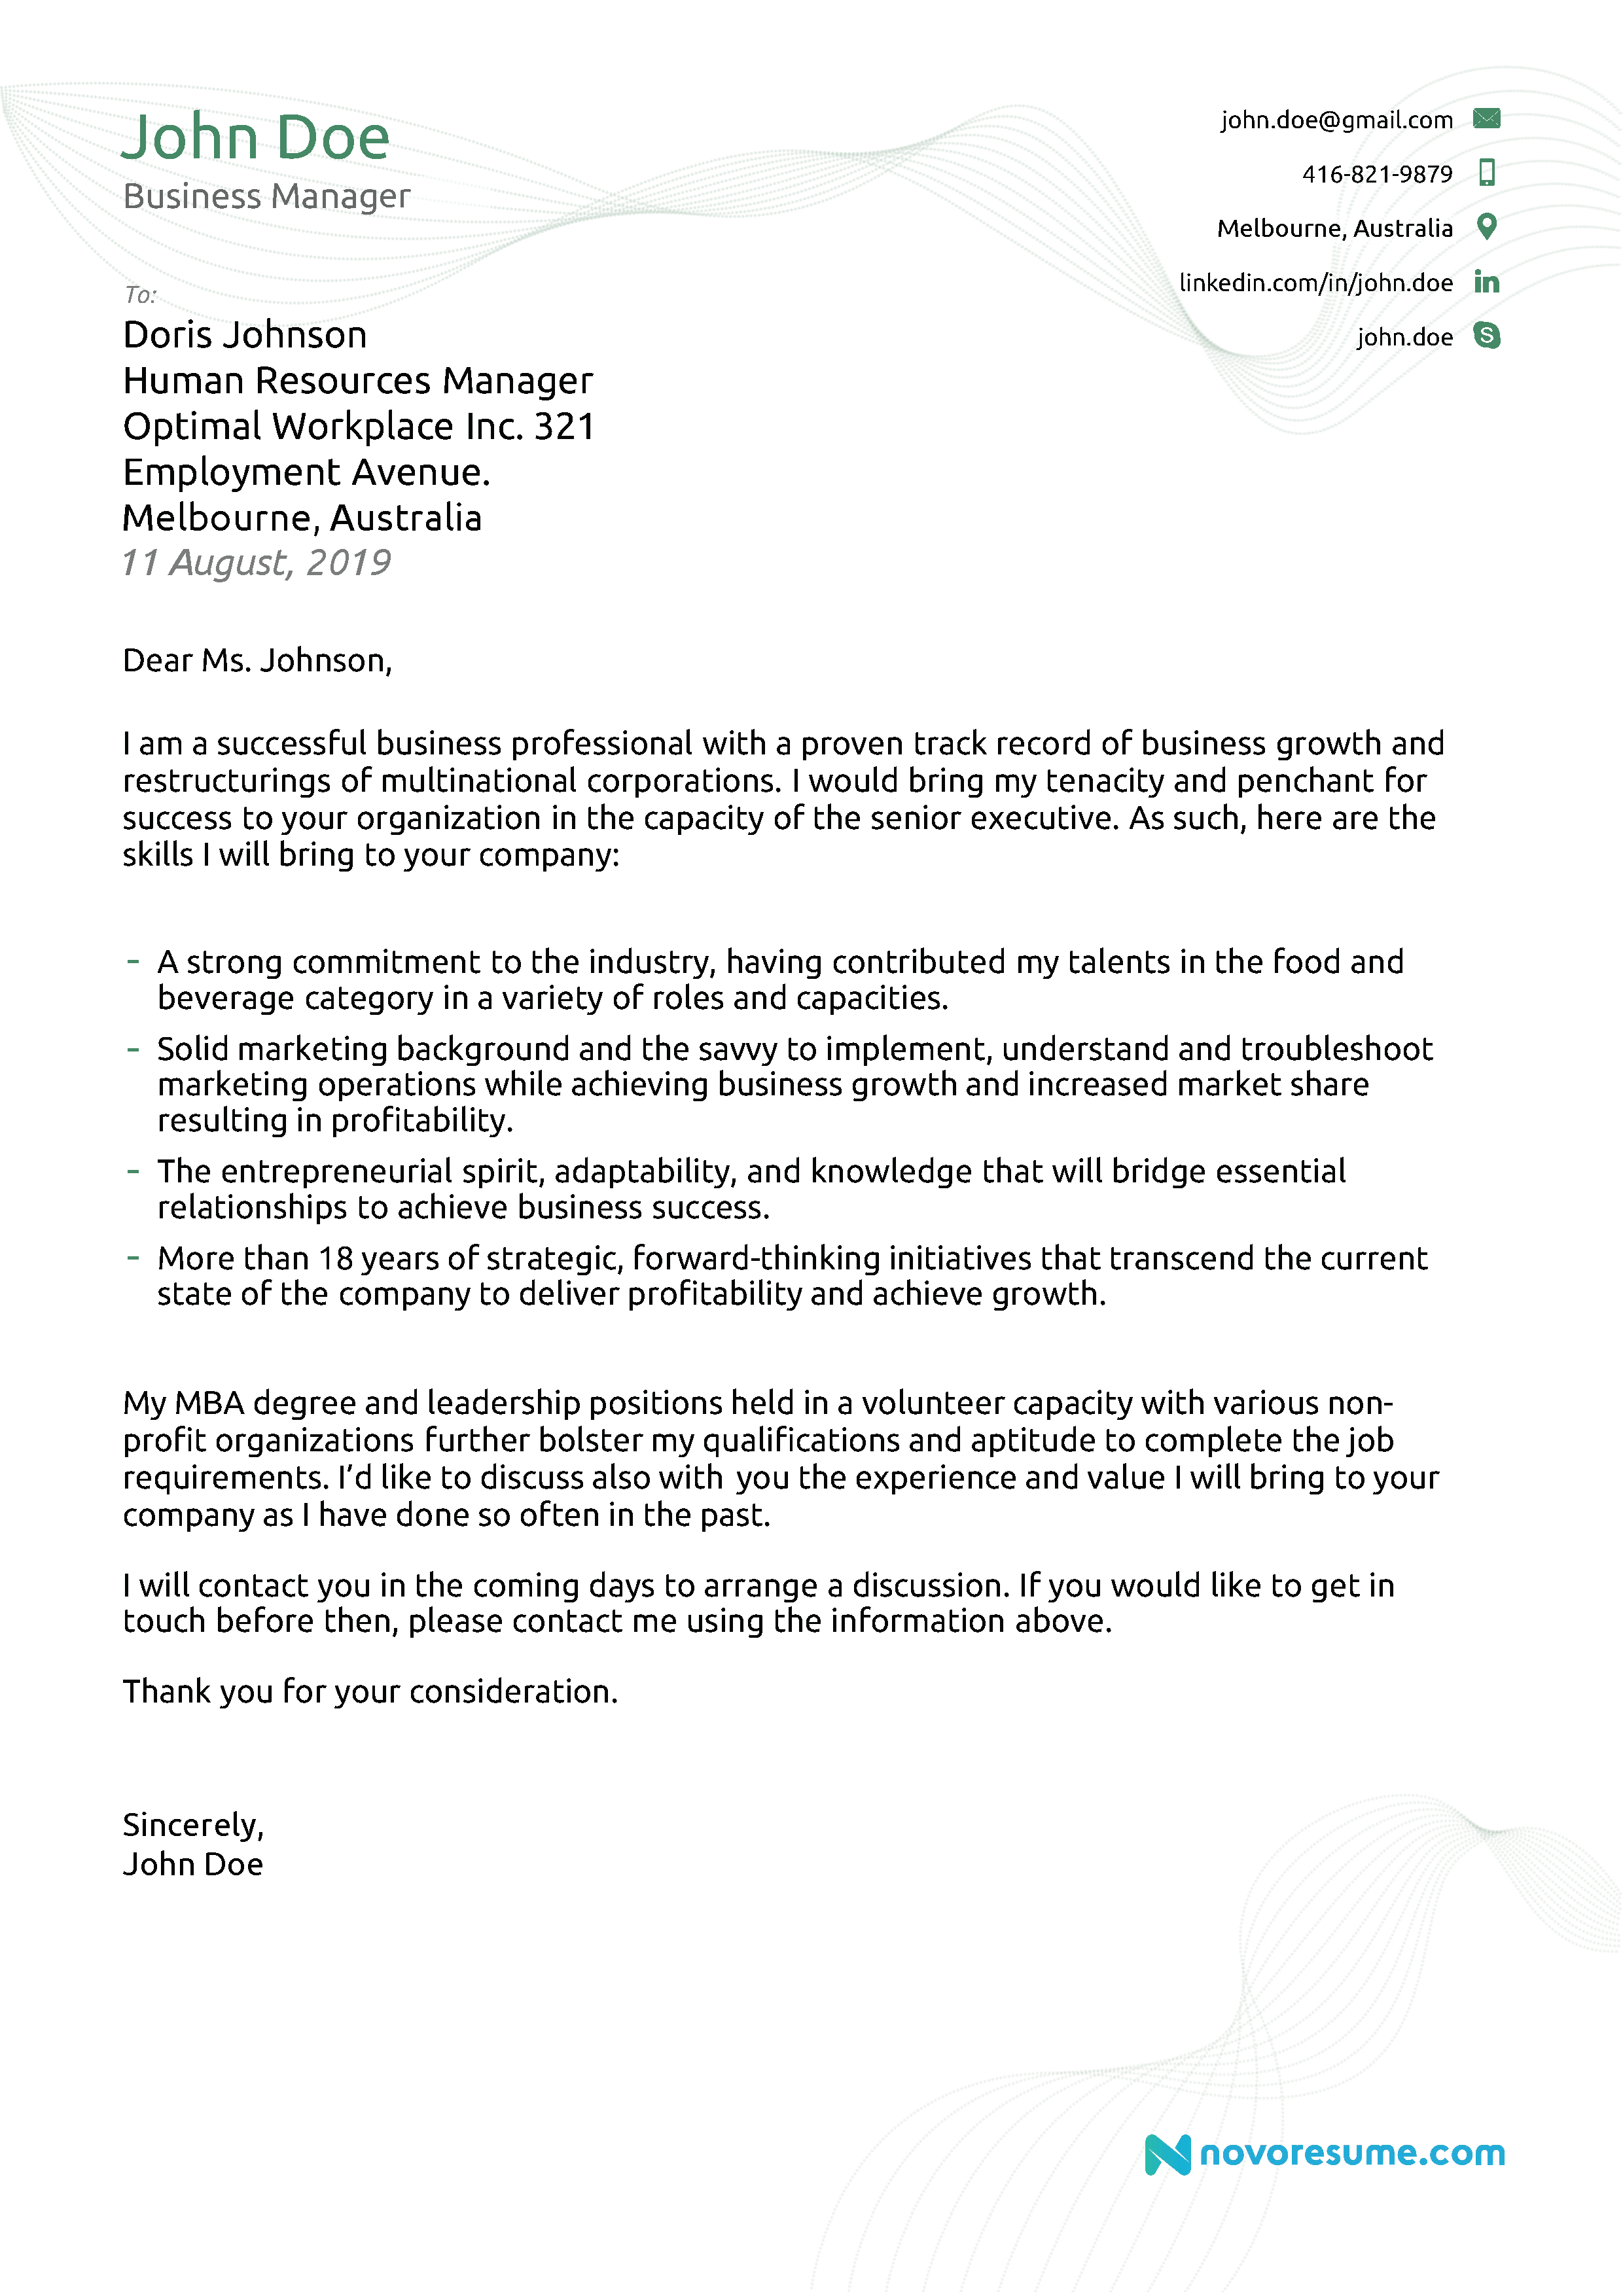 Postdoc Cover Letter Sample Pdf from d35w6hwqhdq0in.cloudfront.net